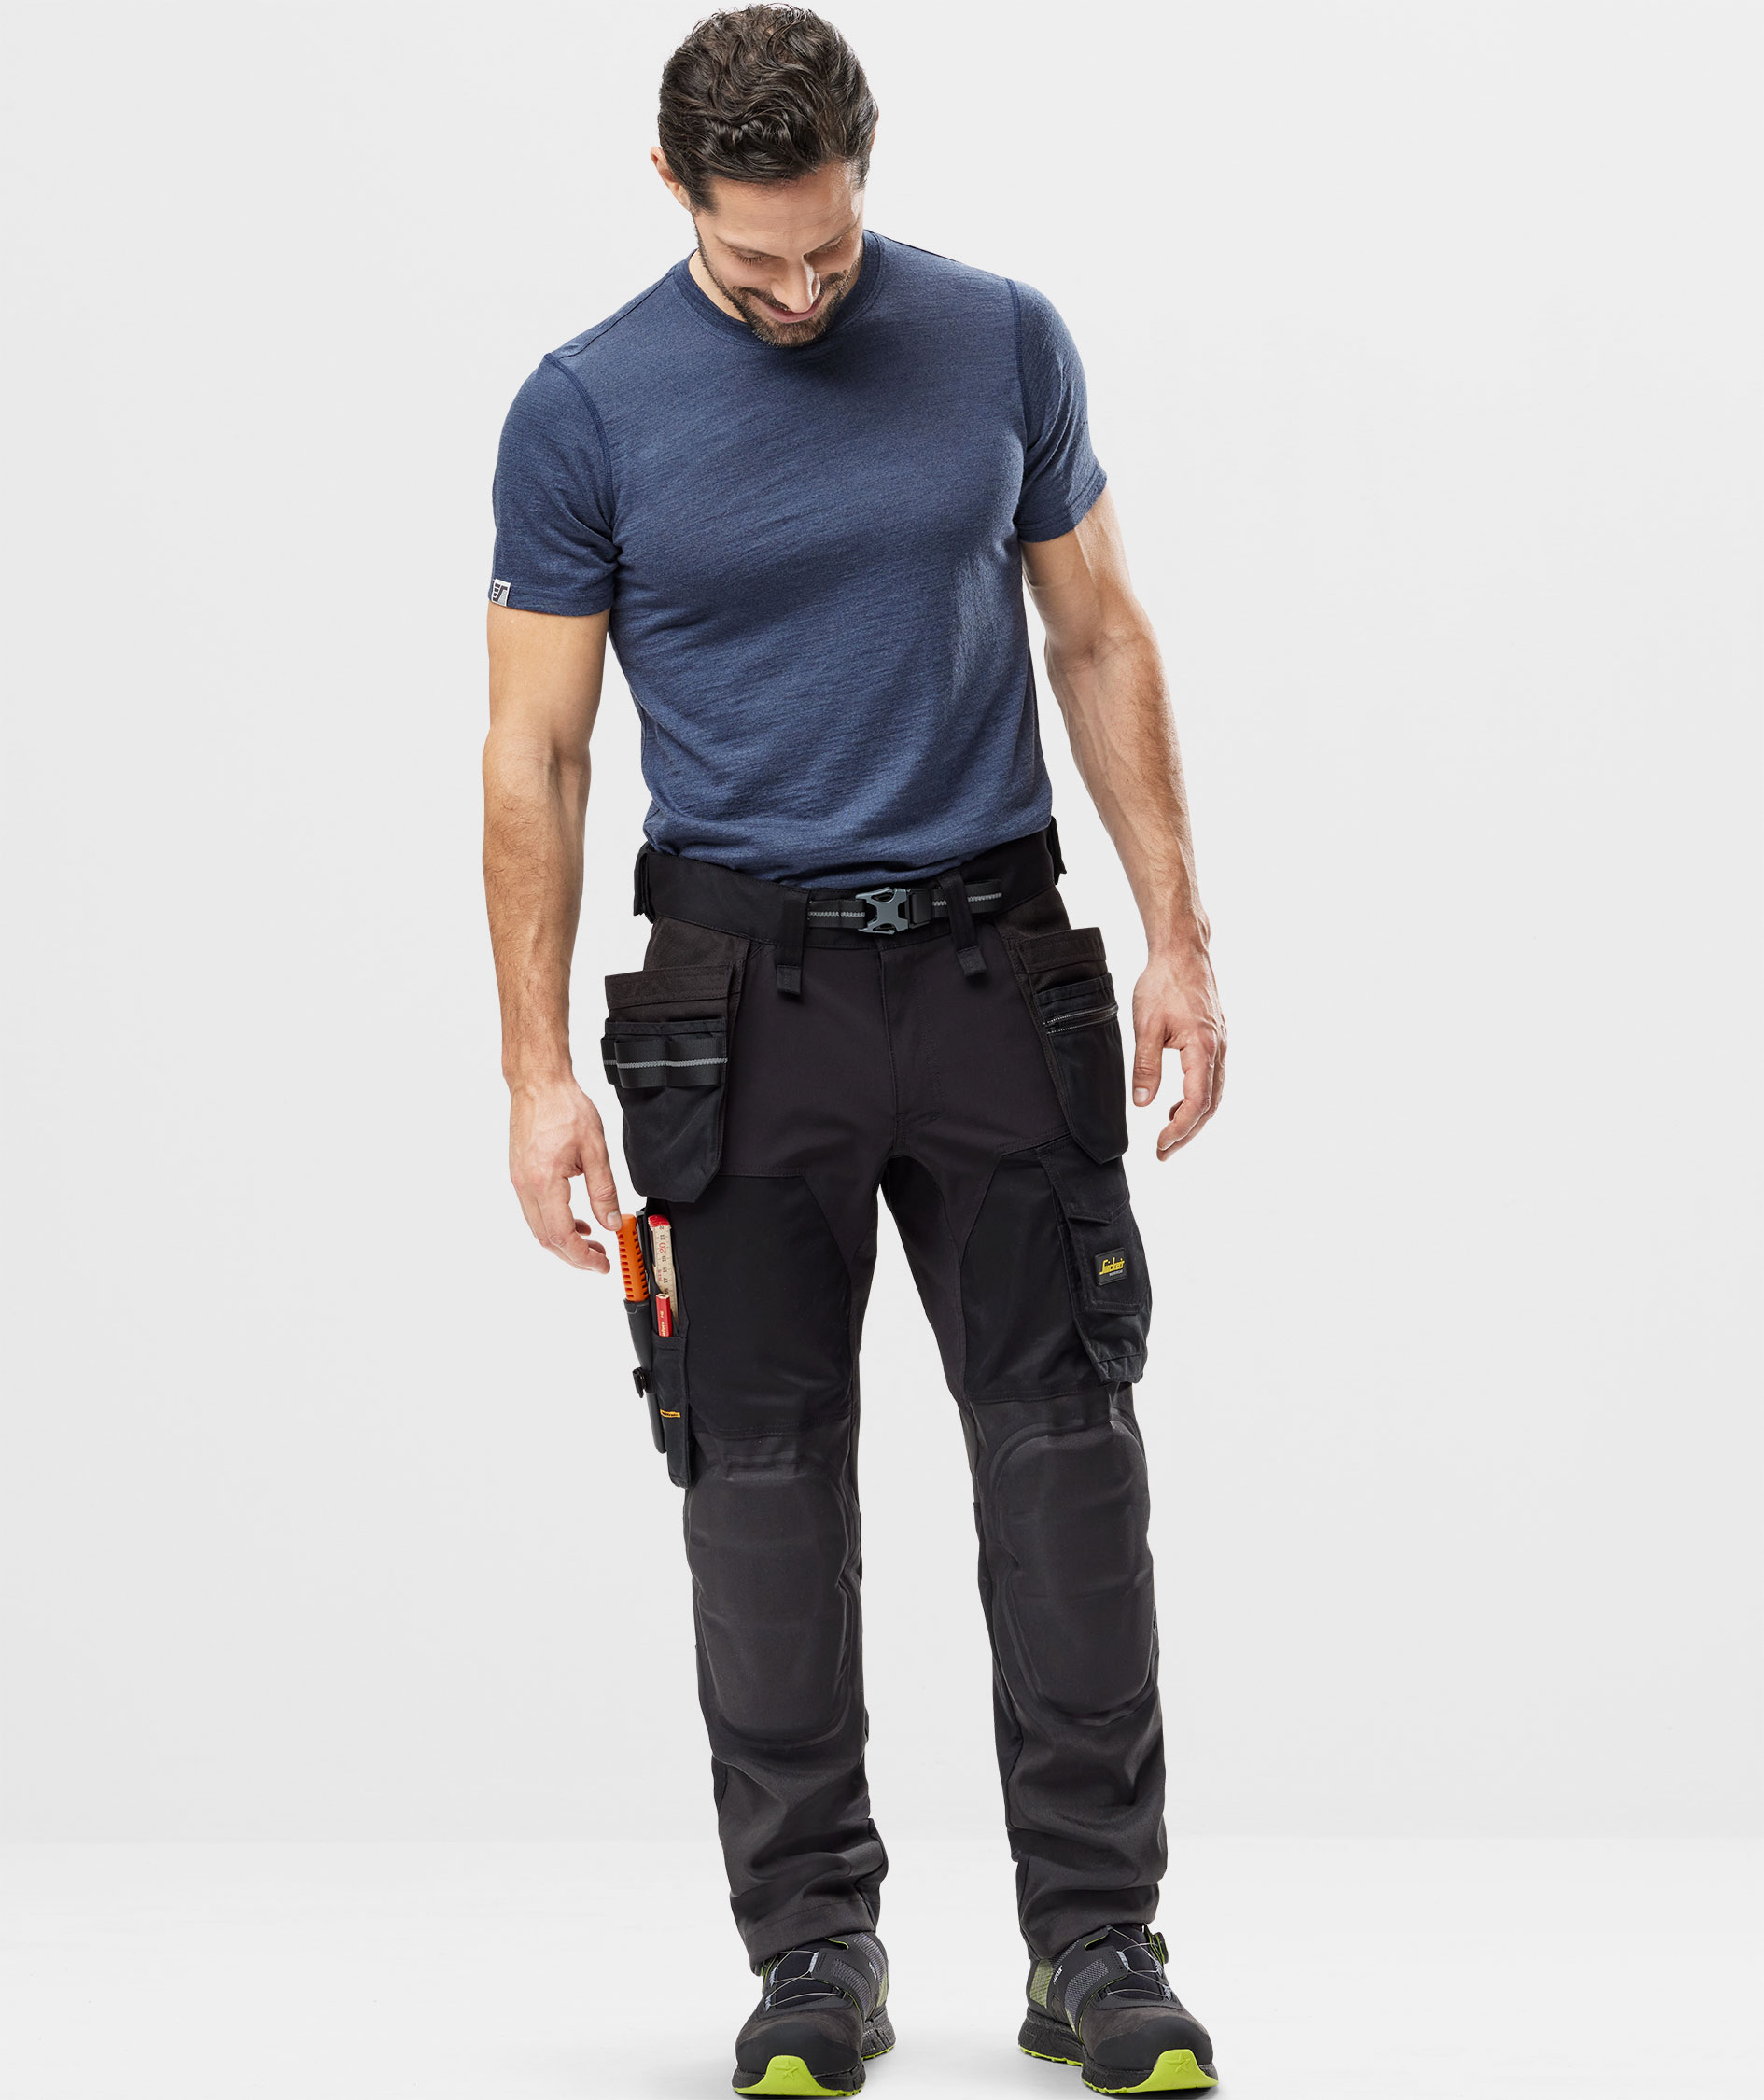 Snickers 6563 ProtecWork Flame Retardant Waterproof Shell Trousers Class 2  - Clothing from MI Supplies Limited UK